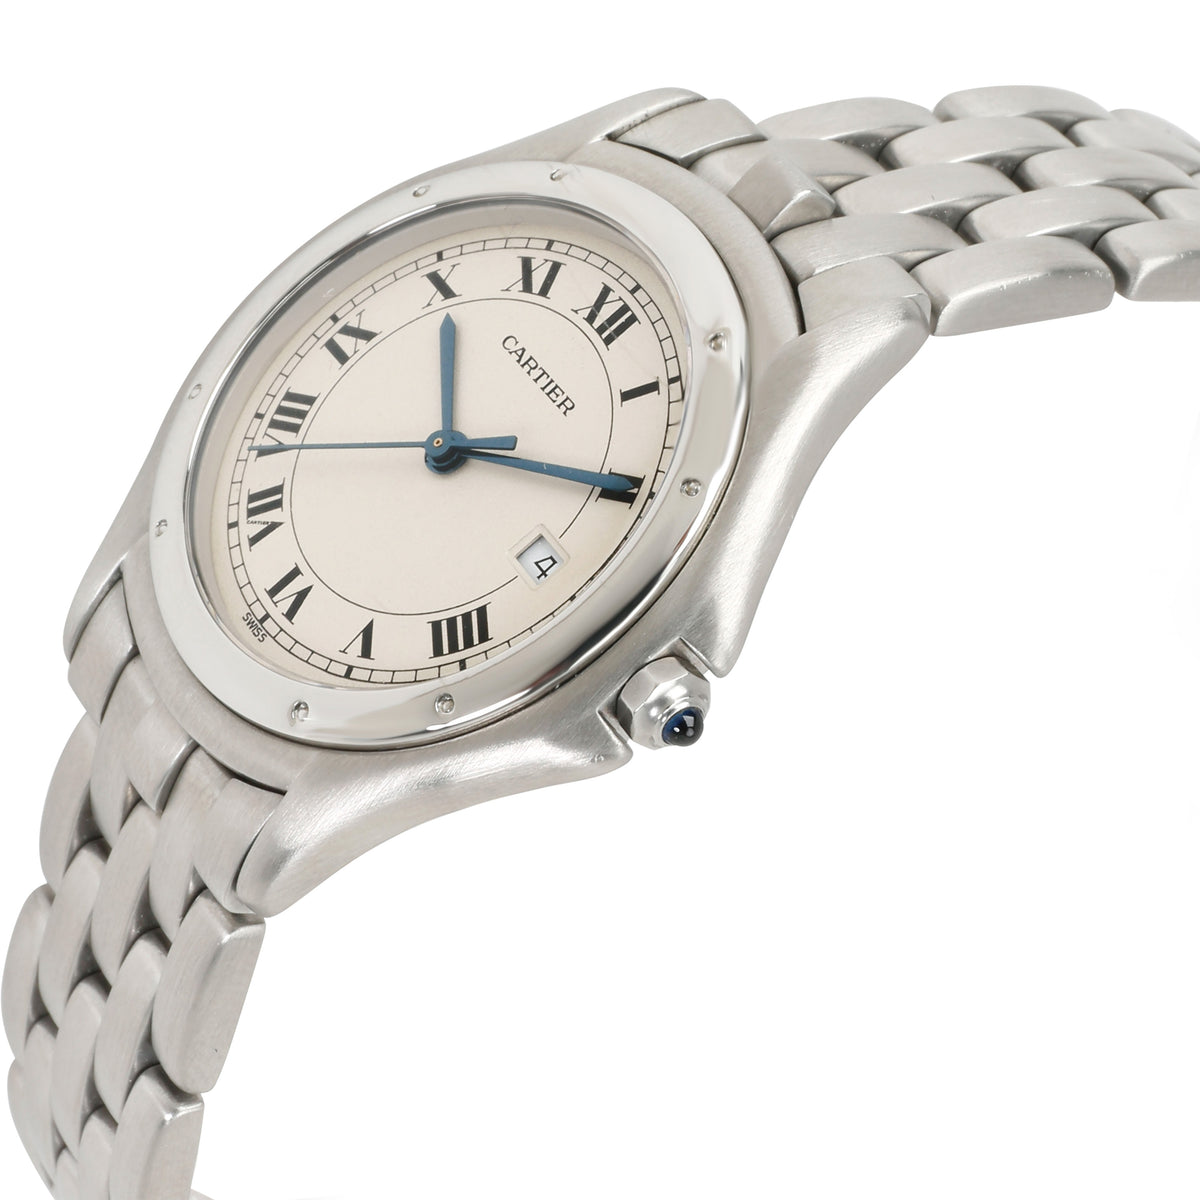 Cartier Cougar 987904 Unisex Watch in  Stainless Steel